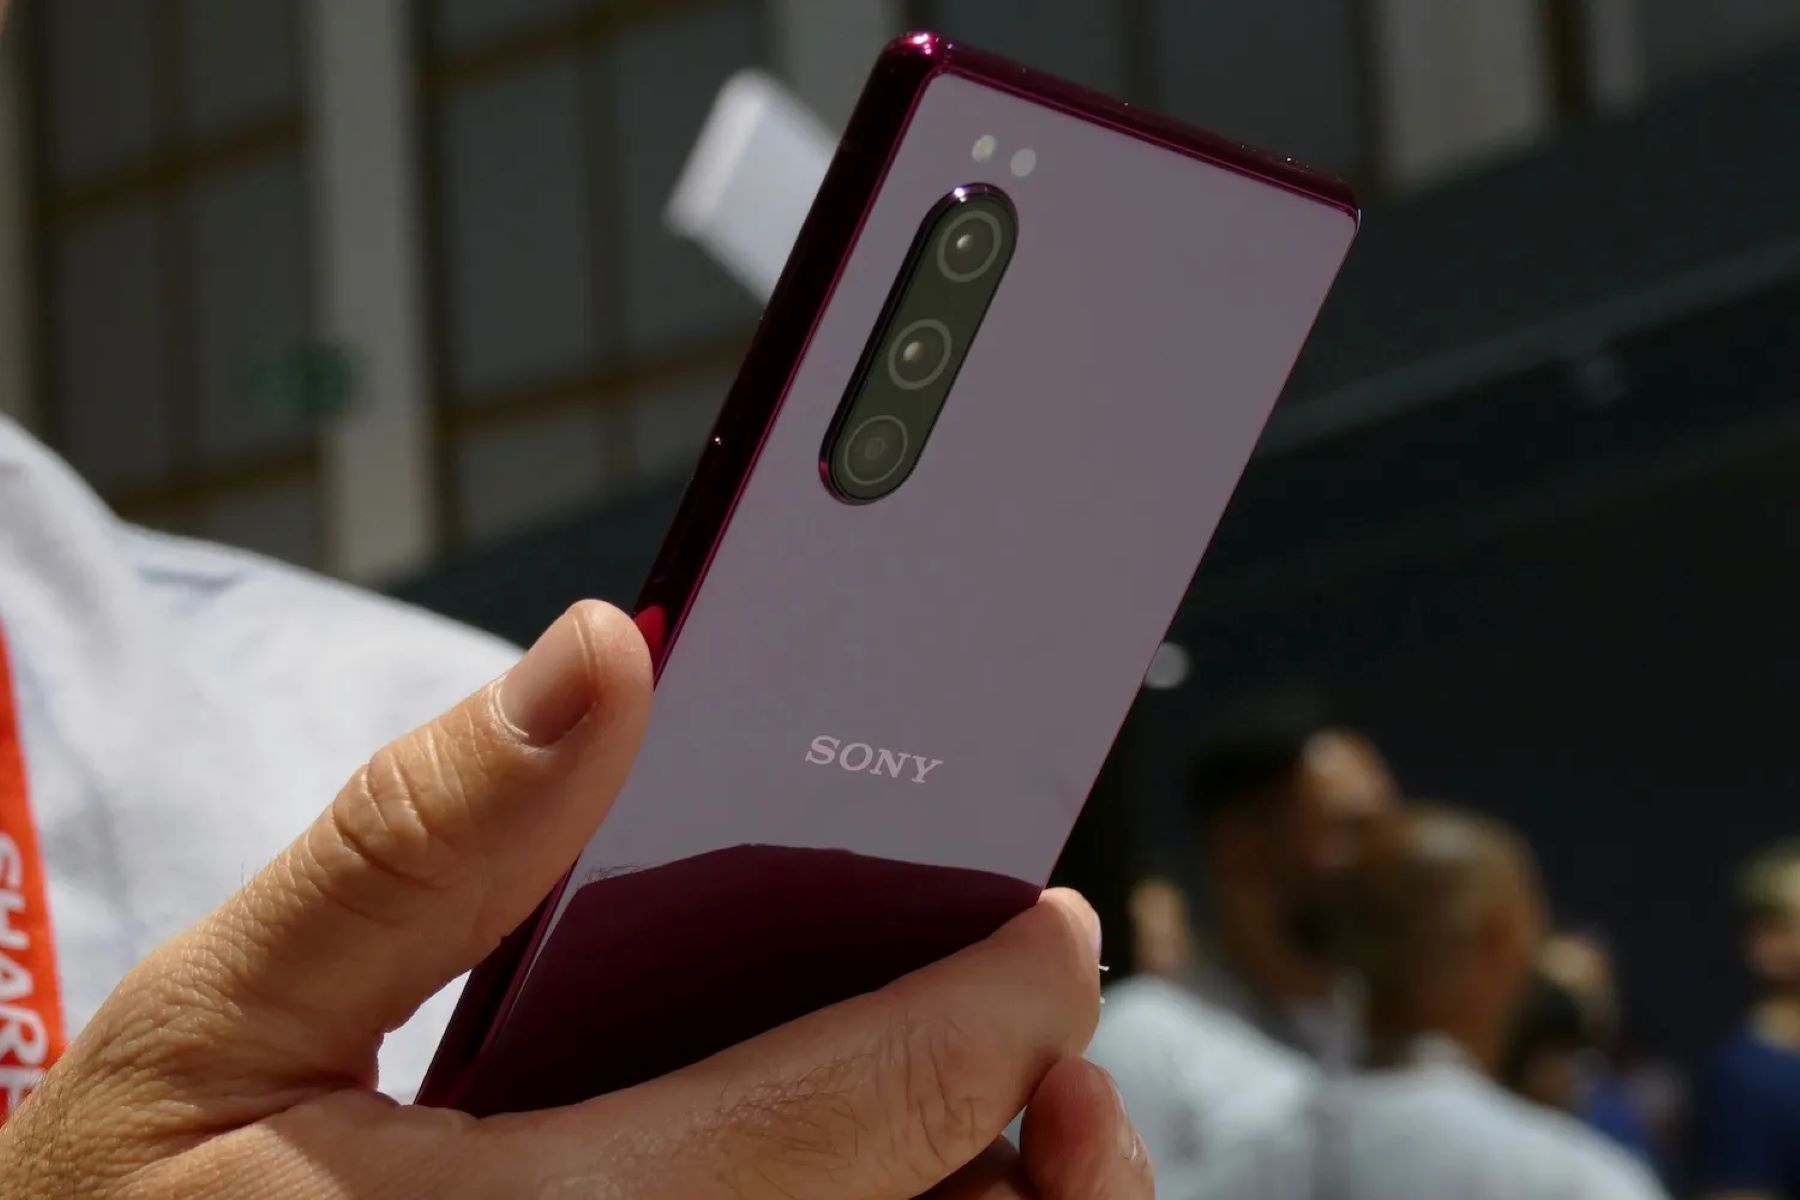 Maintain Privacy: Step-by-Step Guide To Clearing Search History On Sony Xperia